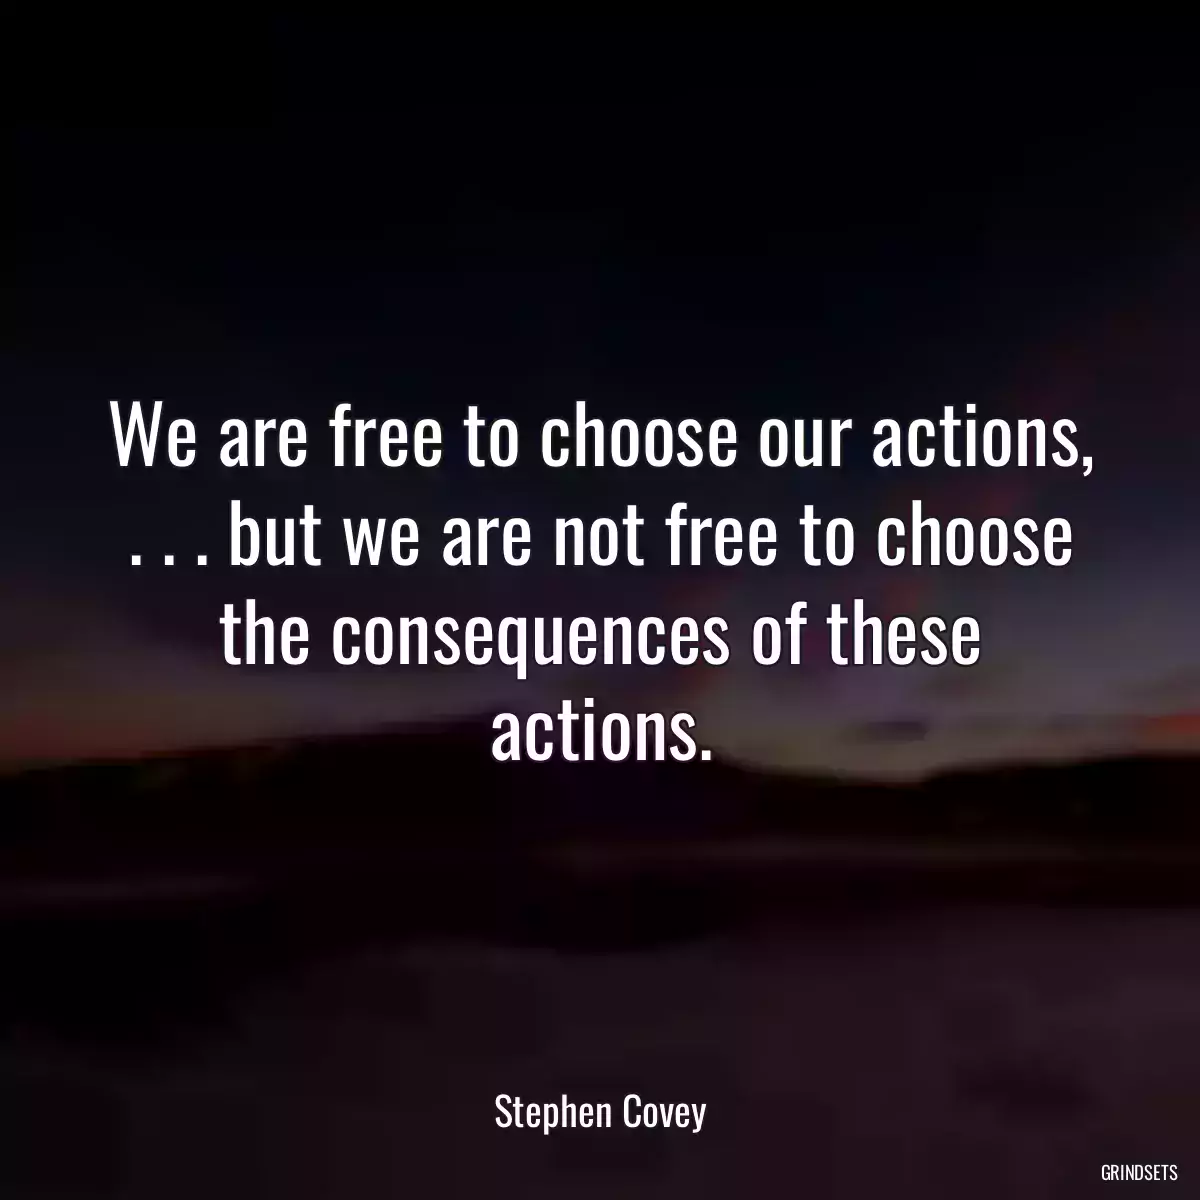 We are free to choose our actions, . . . but we are not free to choose the consequences of these actions.